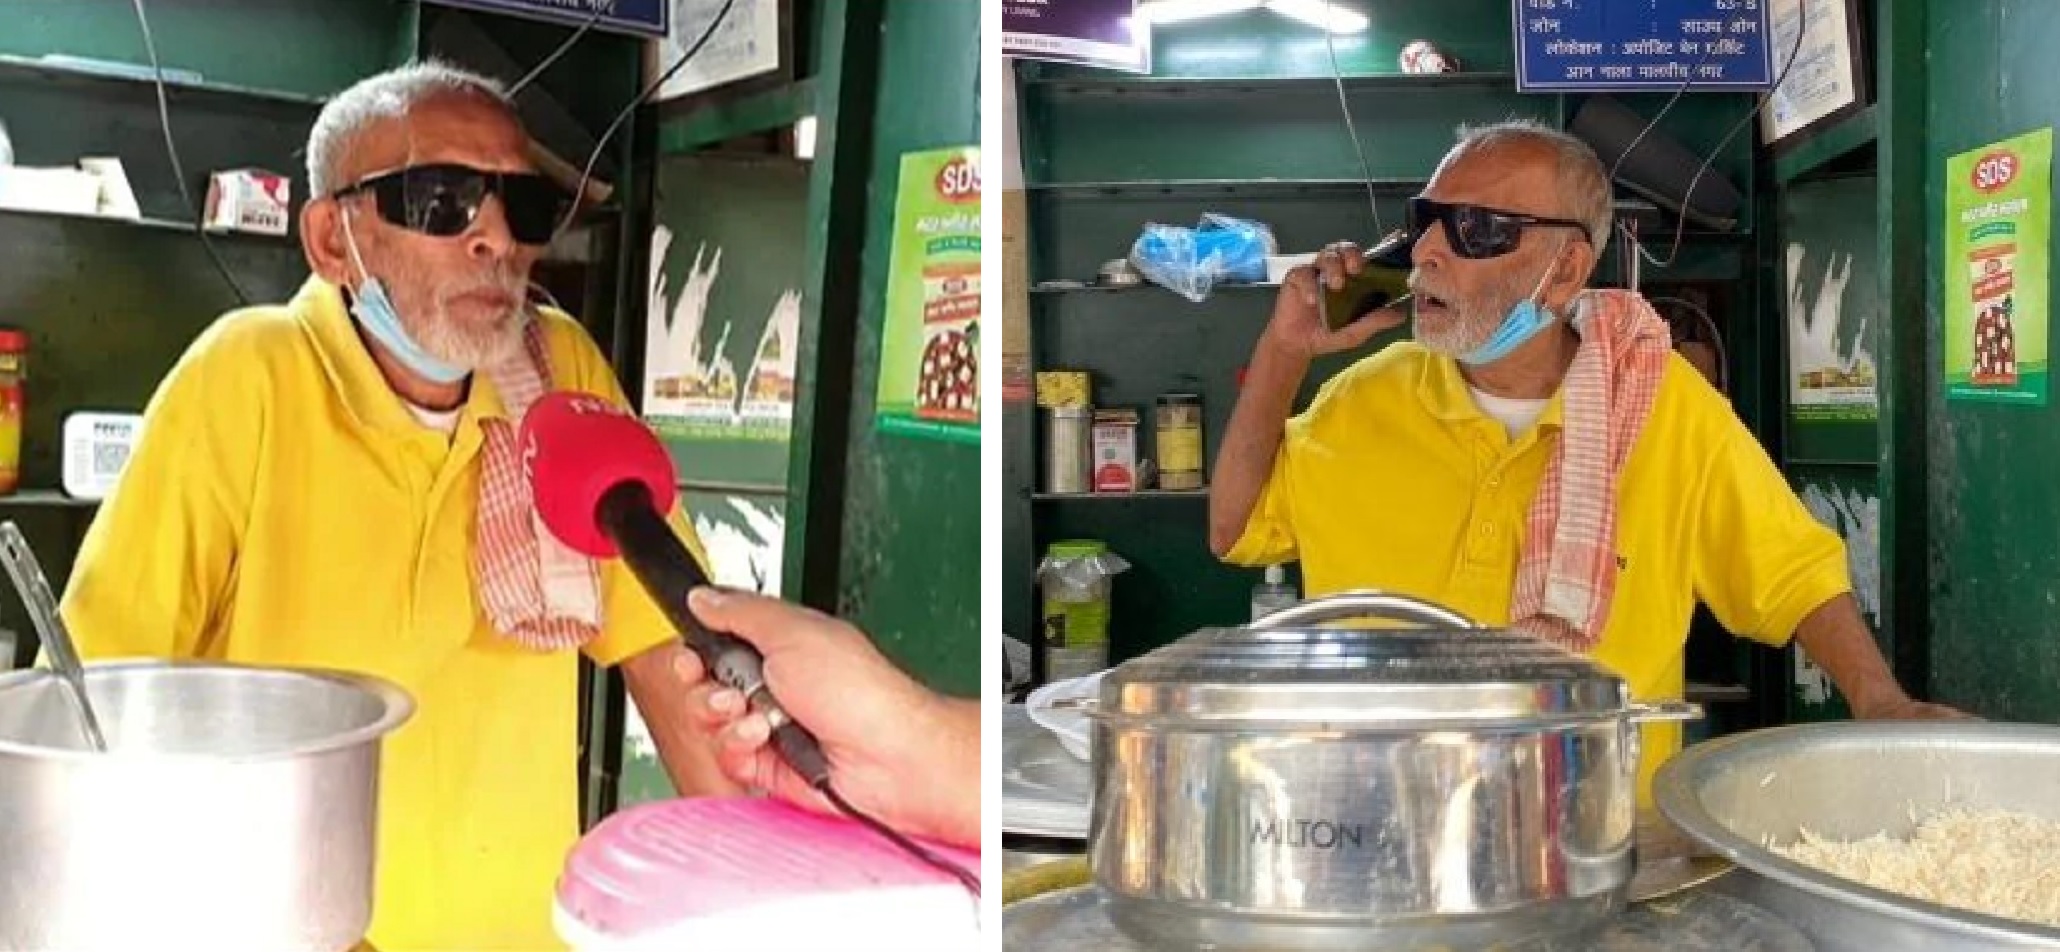 Baba Ka Dhaba Owner Files Complaint Against YouTuber For Allegedly Misappropriating Donation Money